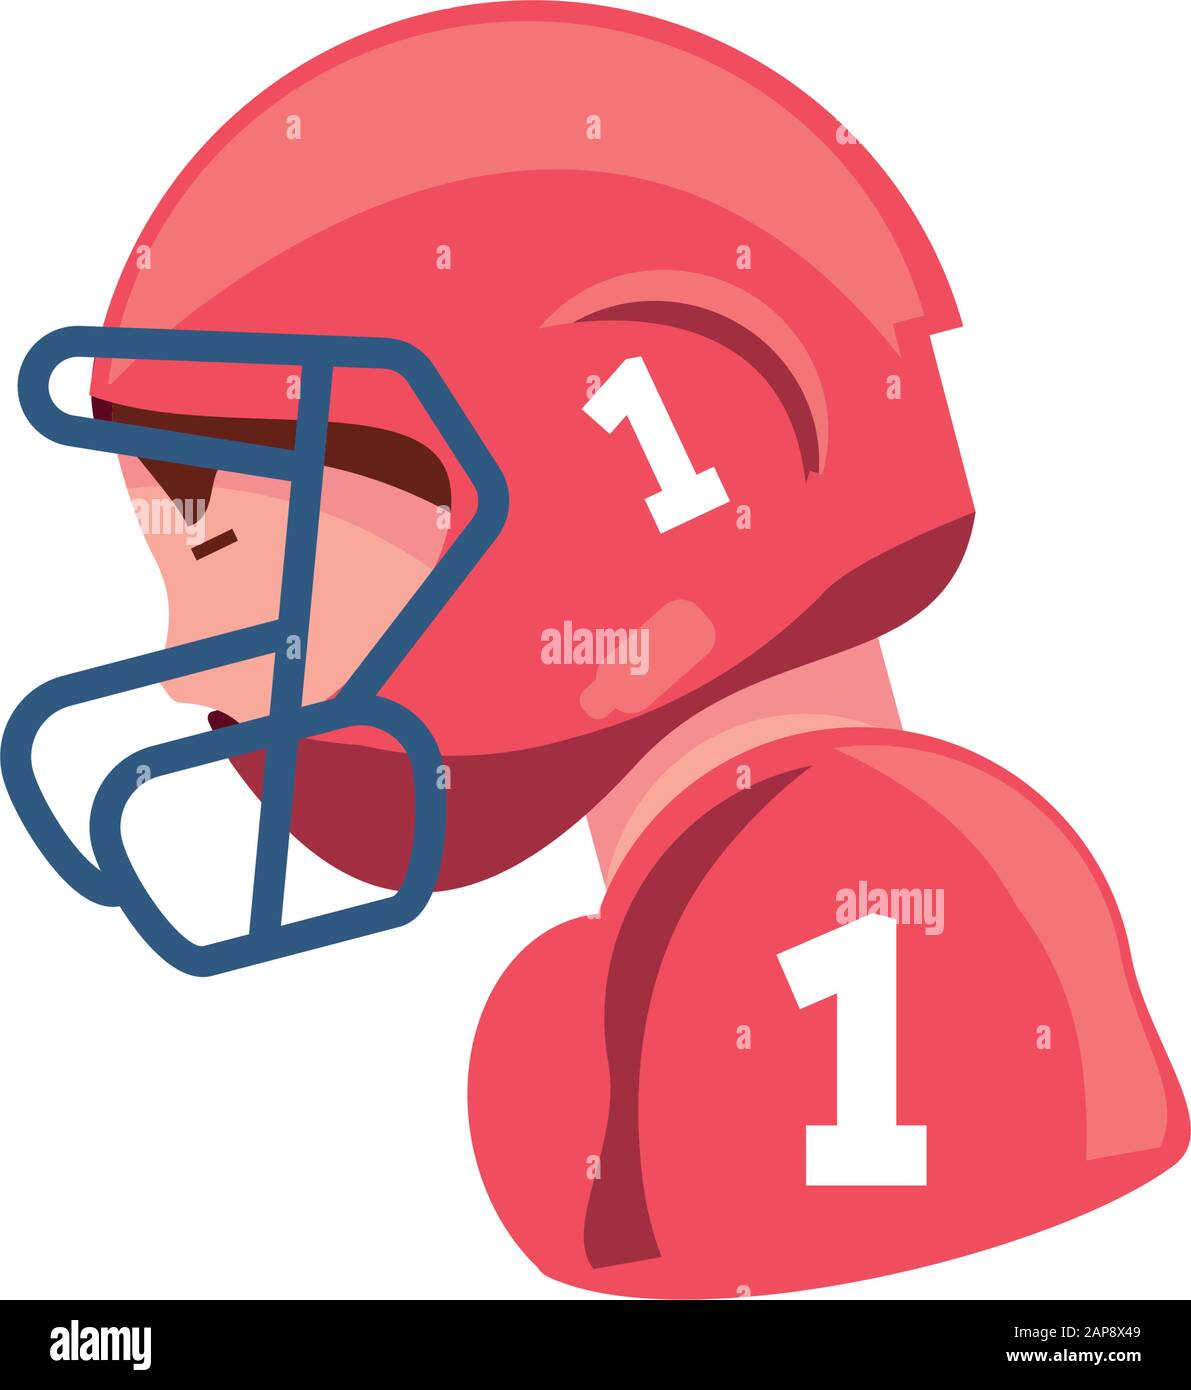 Player with helmet design, American football super bowl sport hobby competition game training equipment tournement and play theme Vector illustration Stock Vector